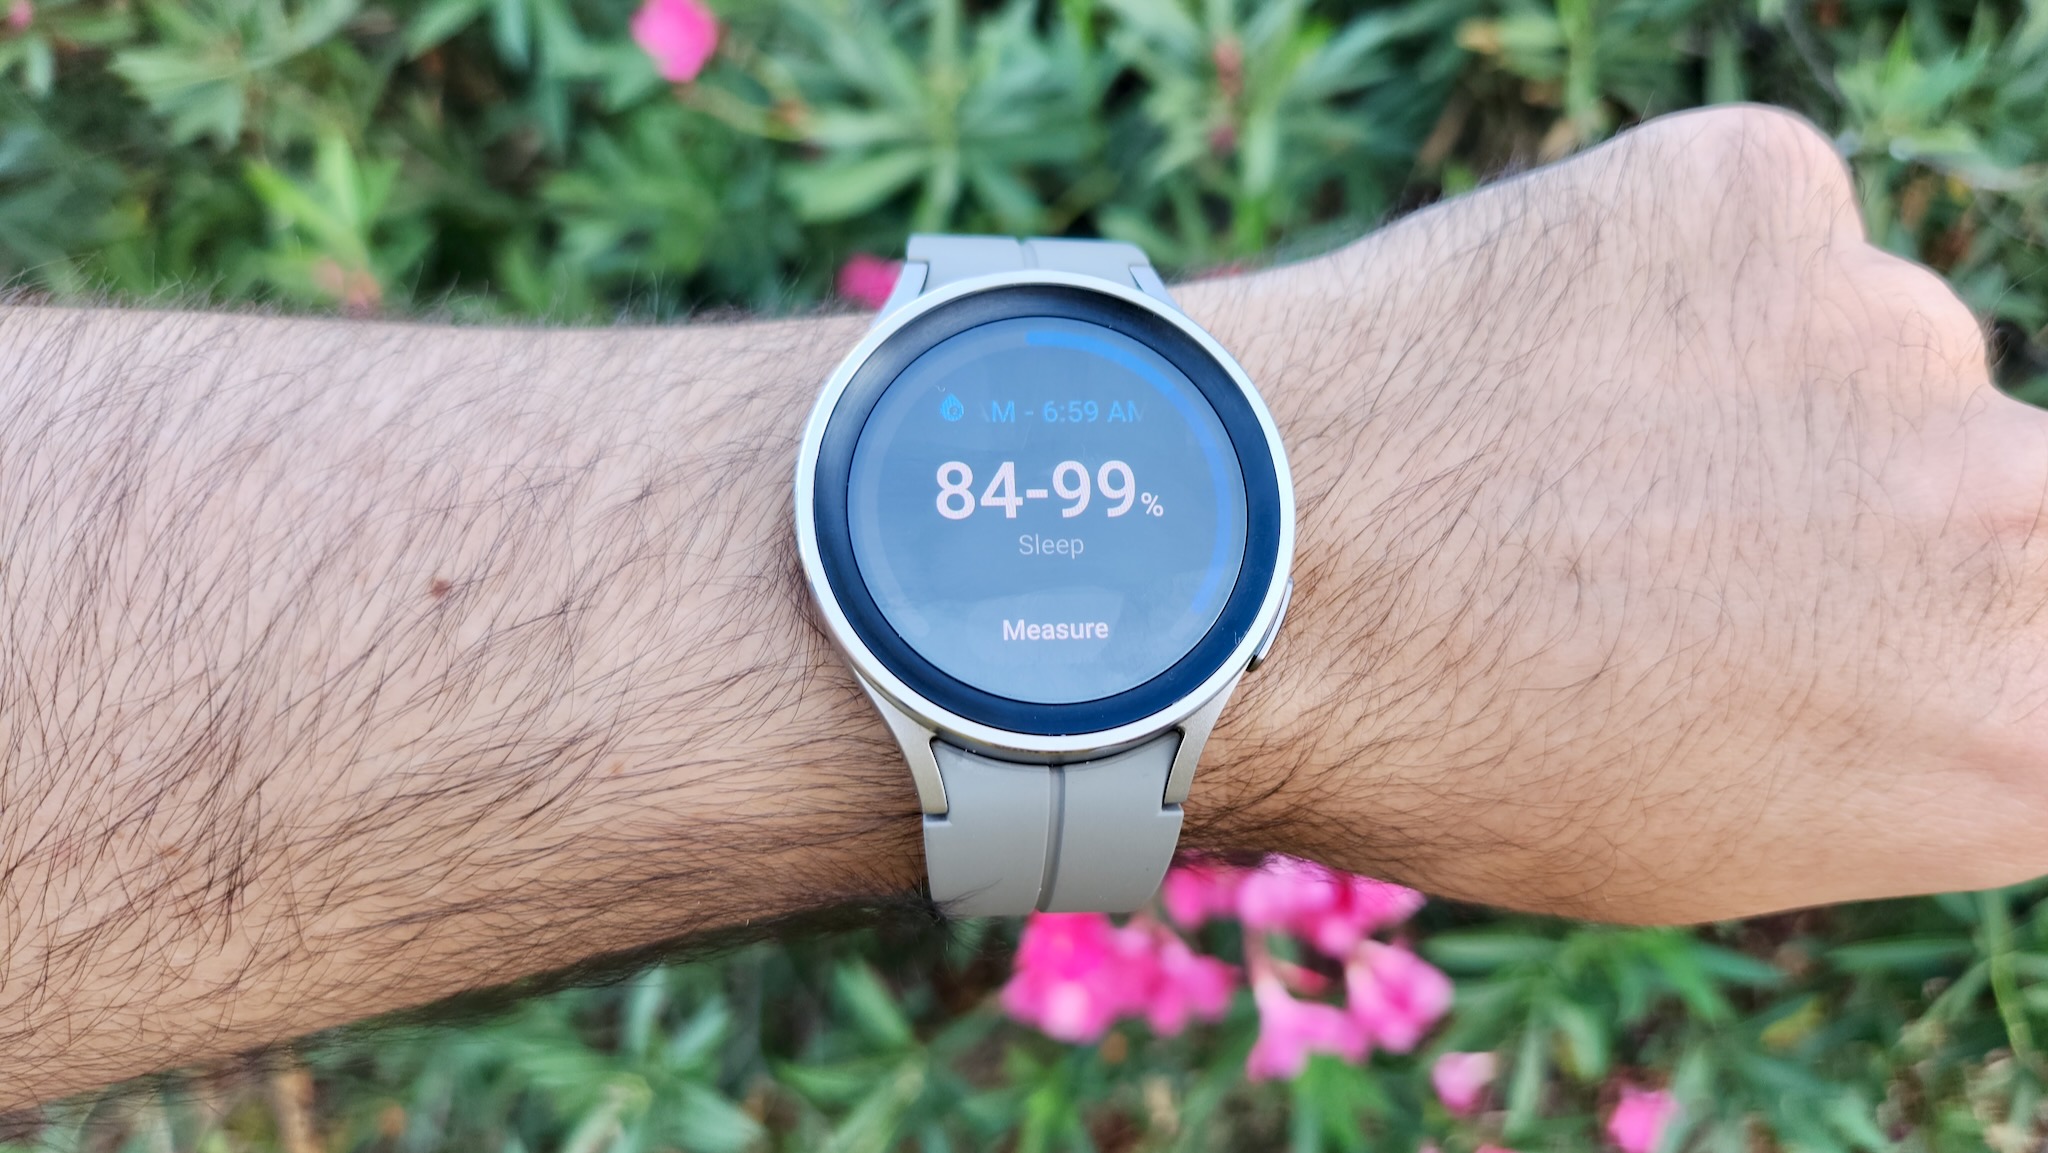 Samsung Galaxy Watch 5 Pro sleep tracking results with blood oxygen levels range